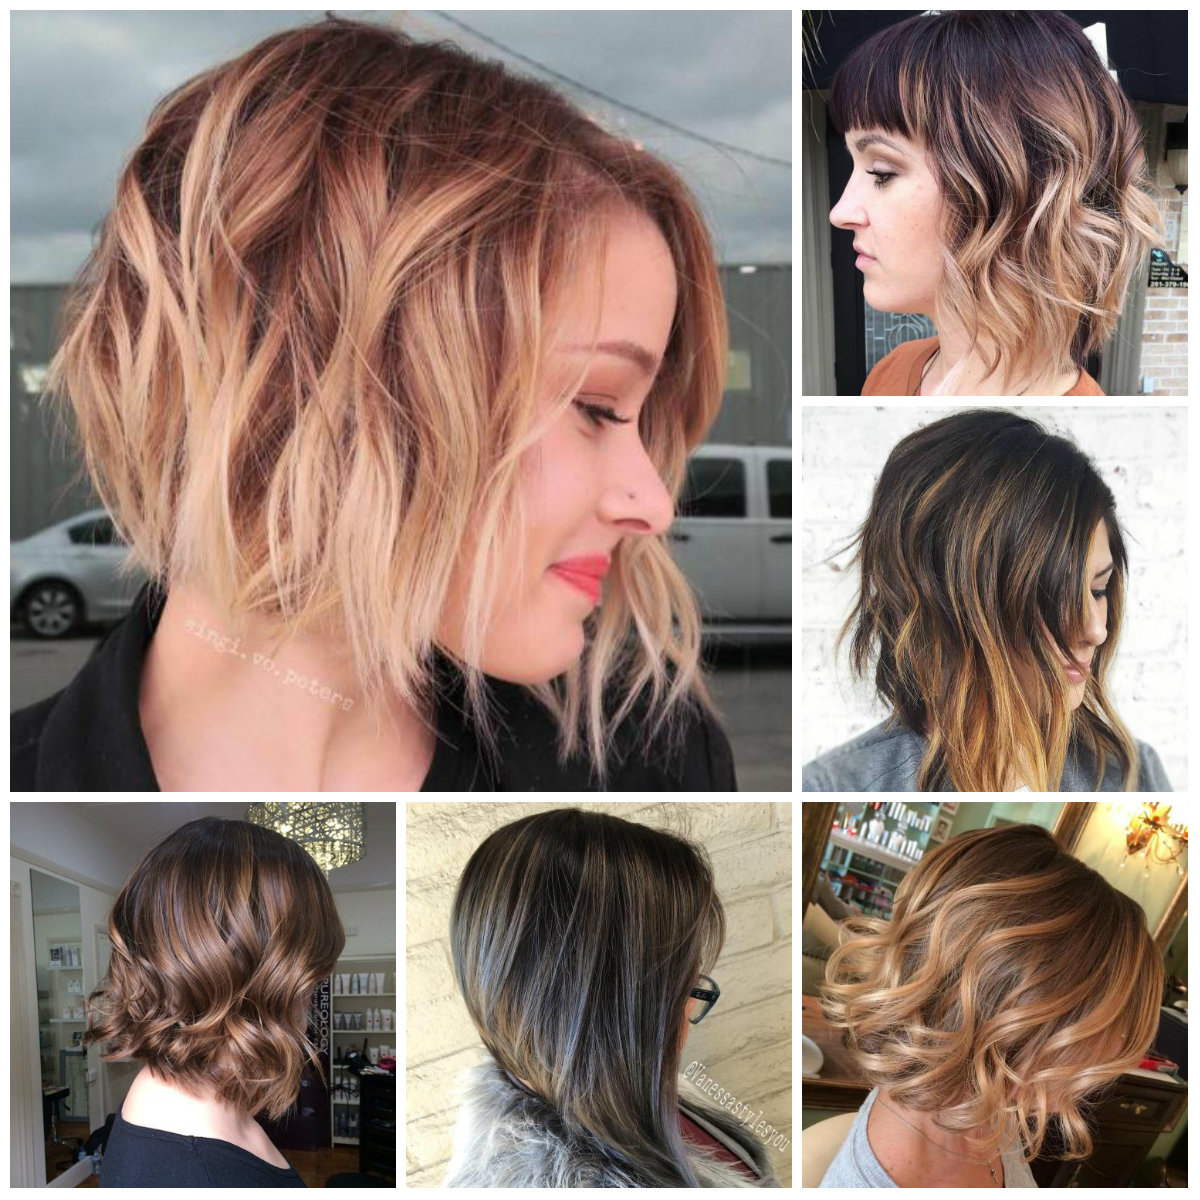 cute short hairstyles and color for fall 2018